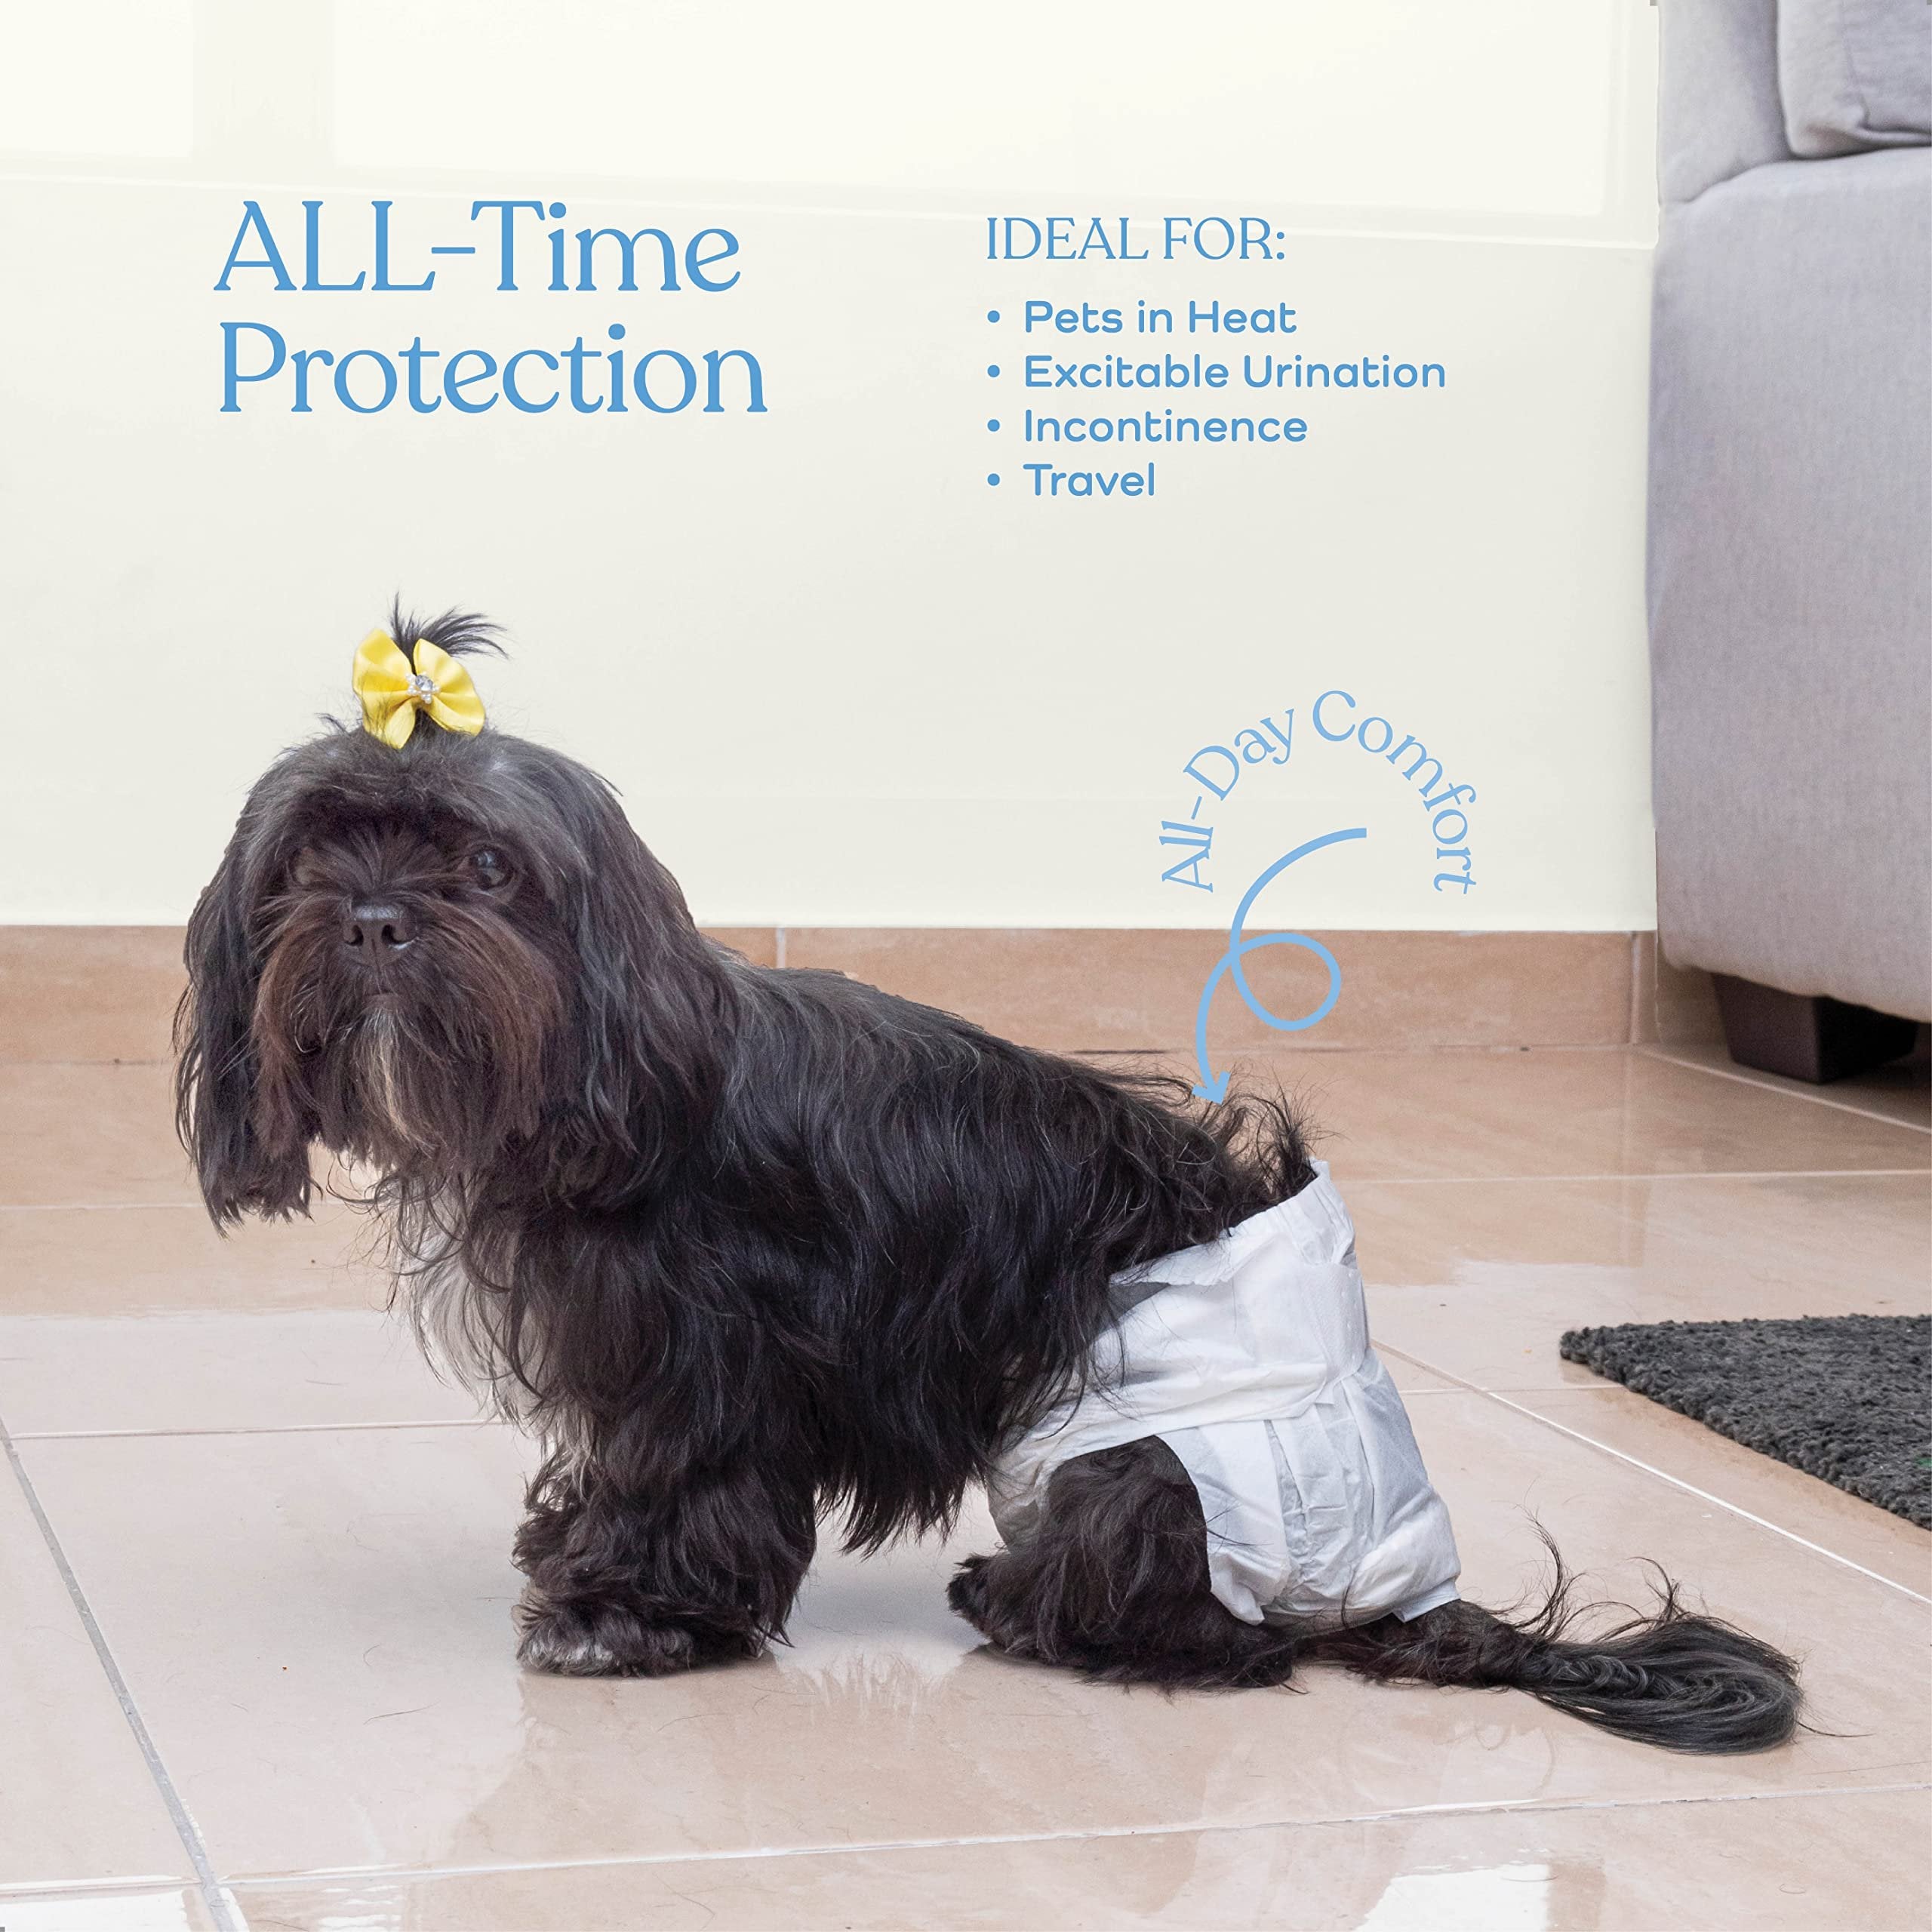 Comfortable Female Dog Diapers - 24-Pack Small White Disposable - Super Absorbent with FlashDry Gel Technology & Wetness Indicator - Leakproof for Dogs in Heat, Incontinence